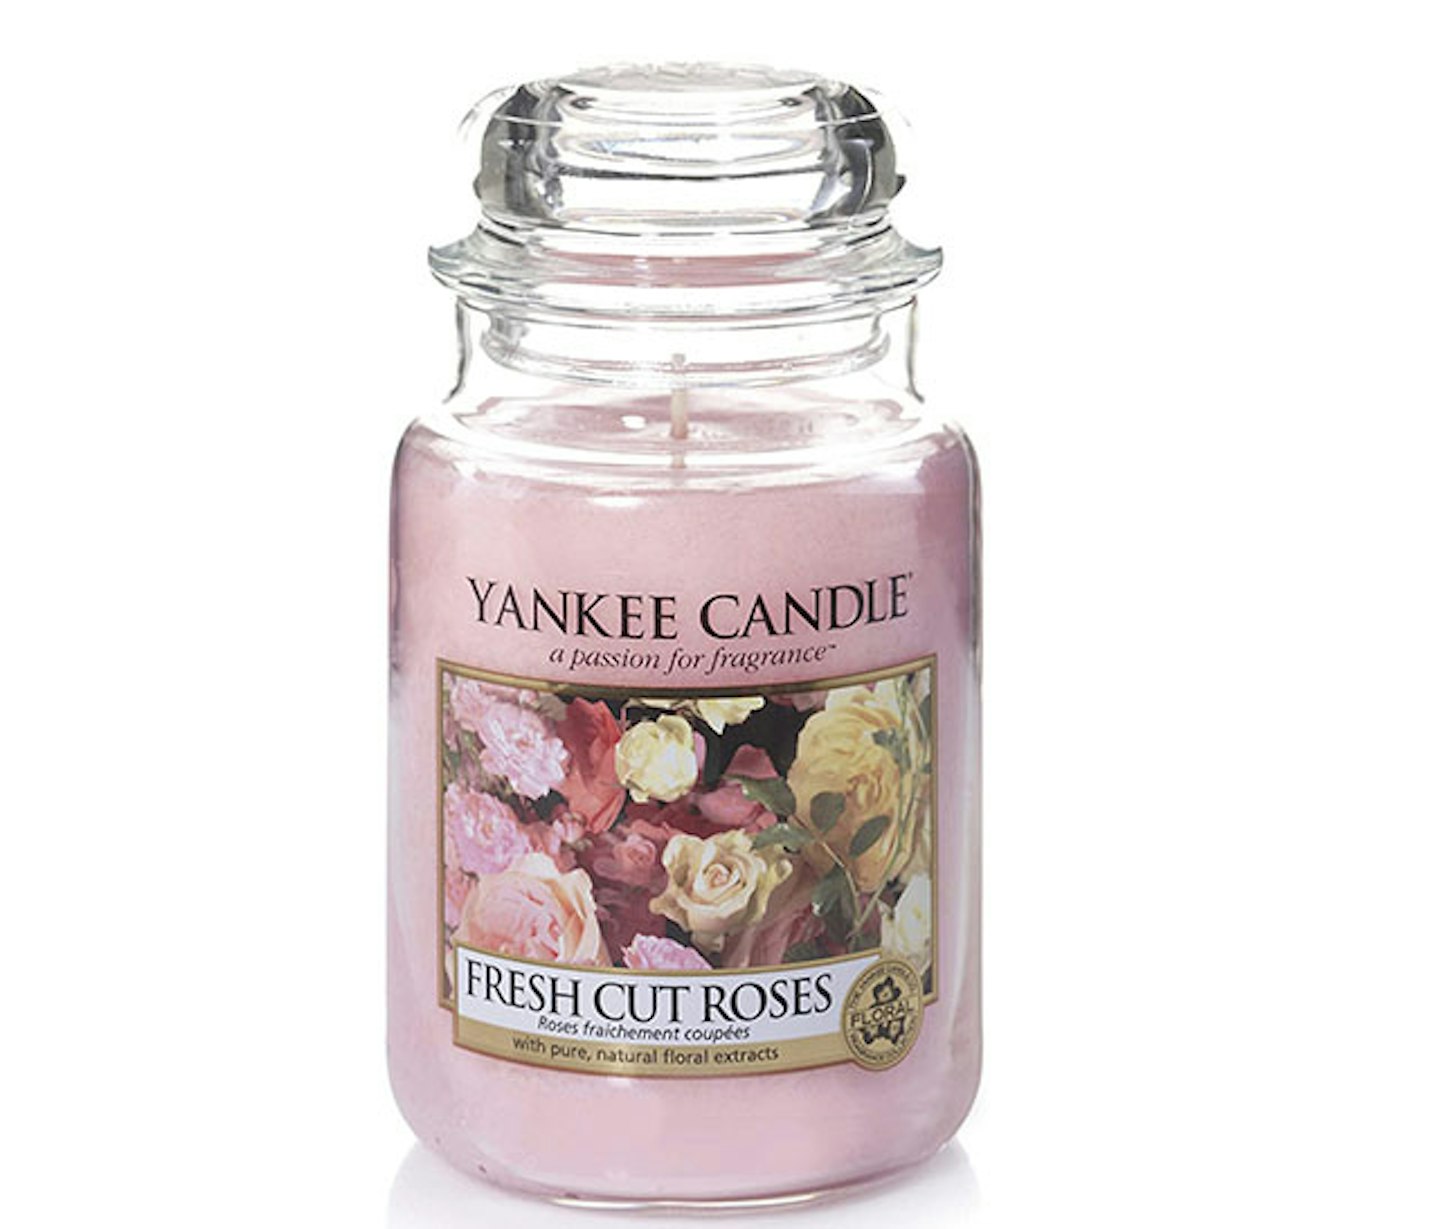 Best Yankee Candle deals: Yankee Candle Fresh Cut Roses Large Jar Candle